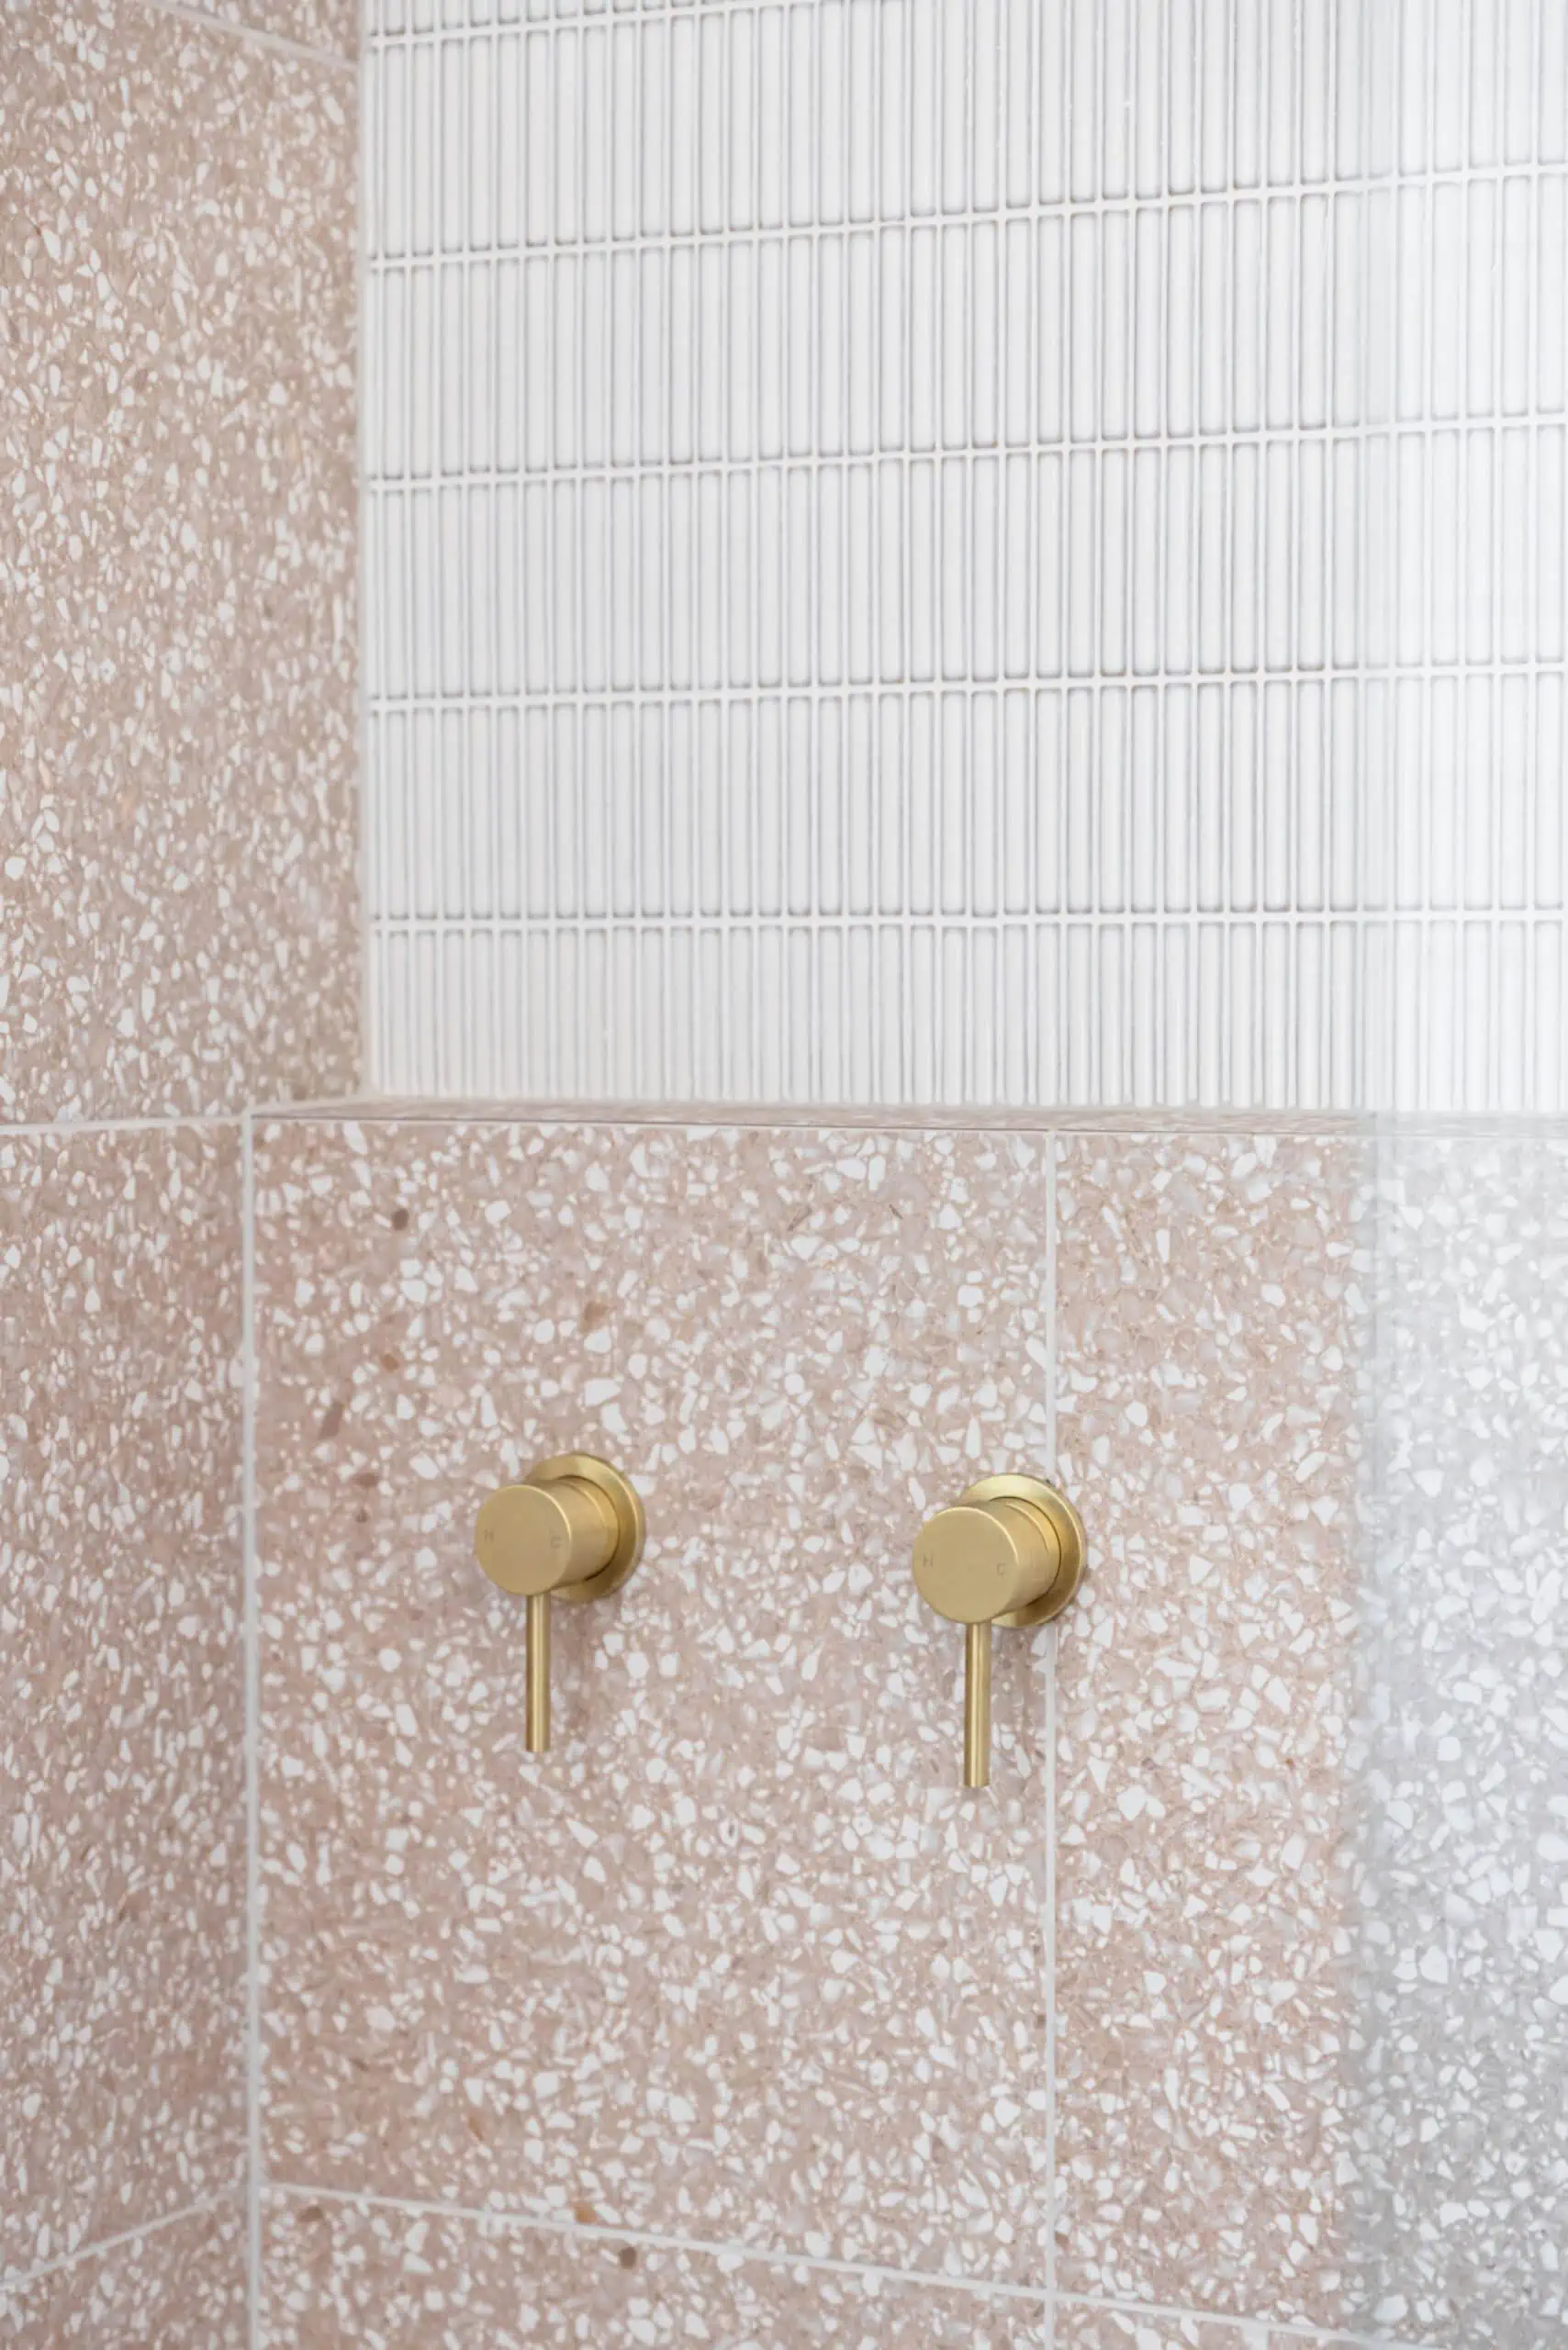 Gold taps on blush pink granite tiles with white finger tiles above in a new shower.